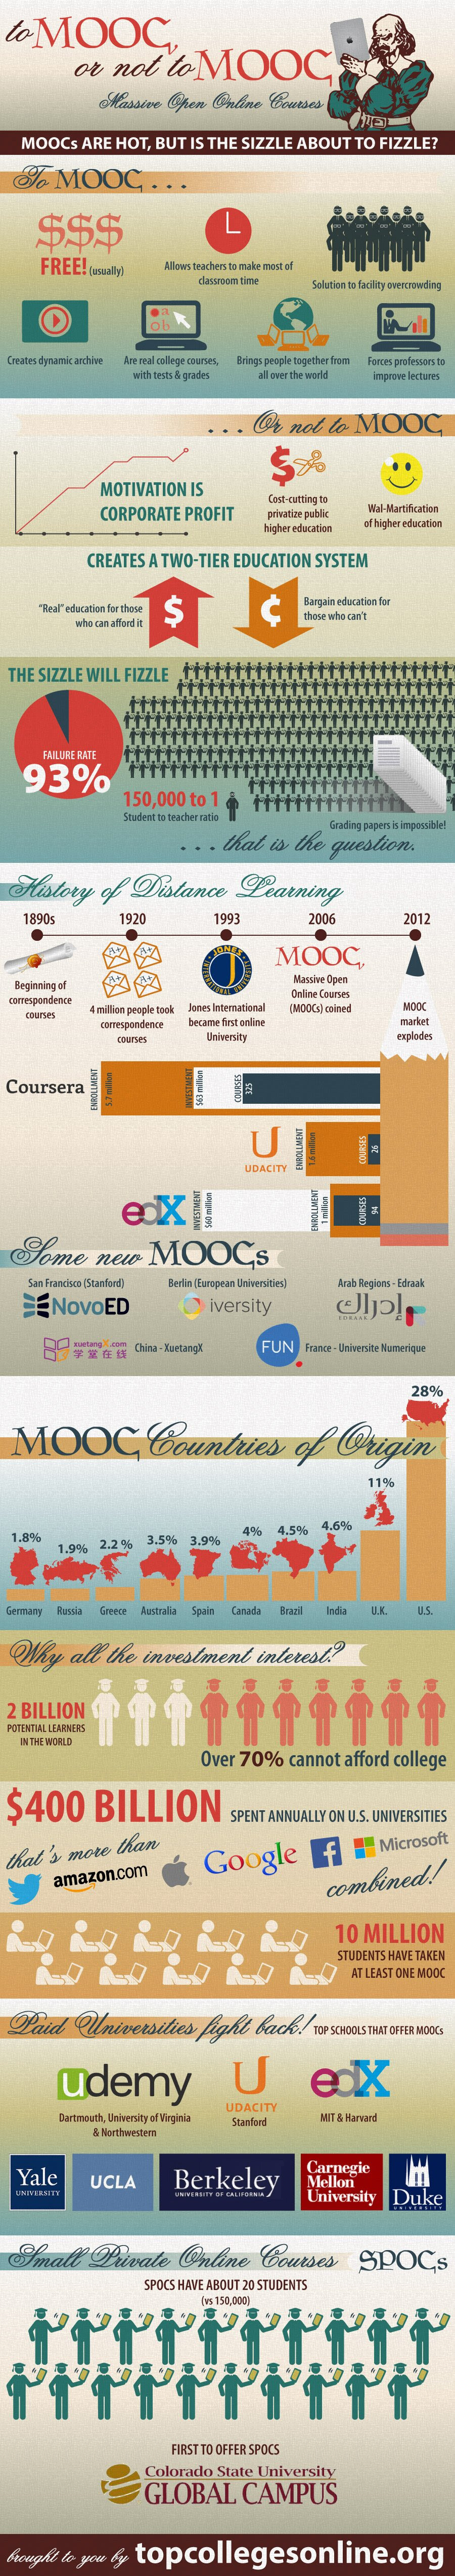 To MOOC, or not to MOOC